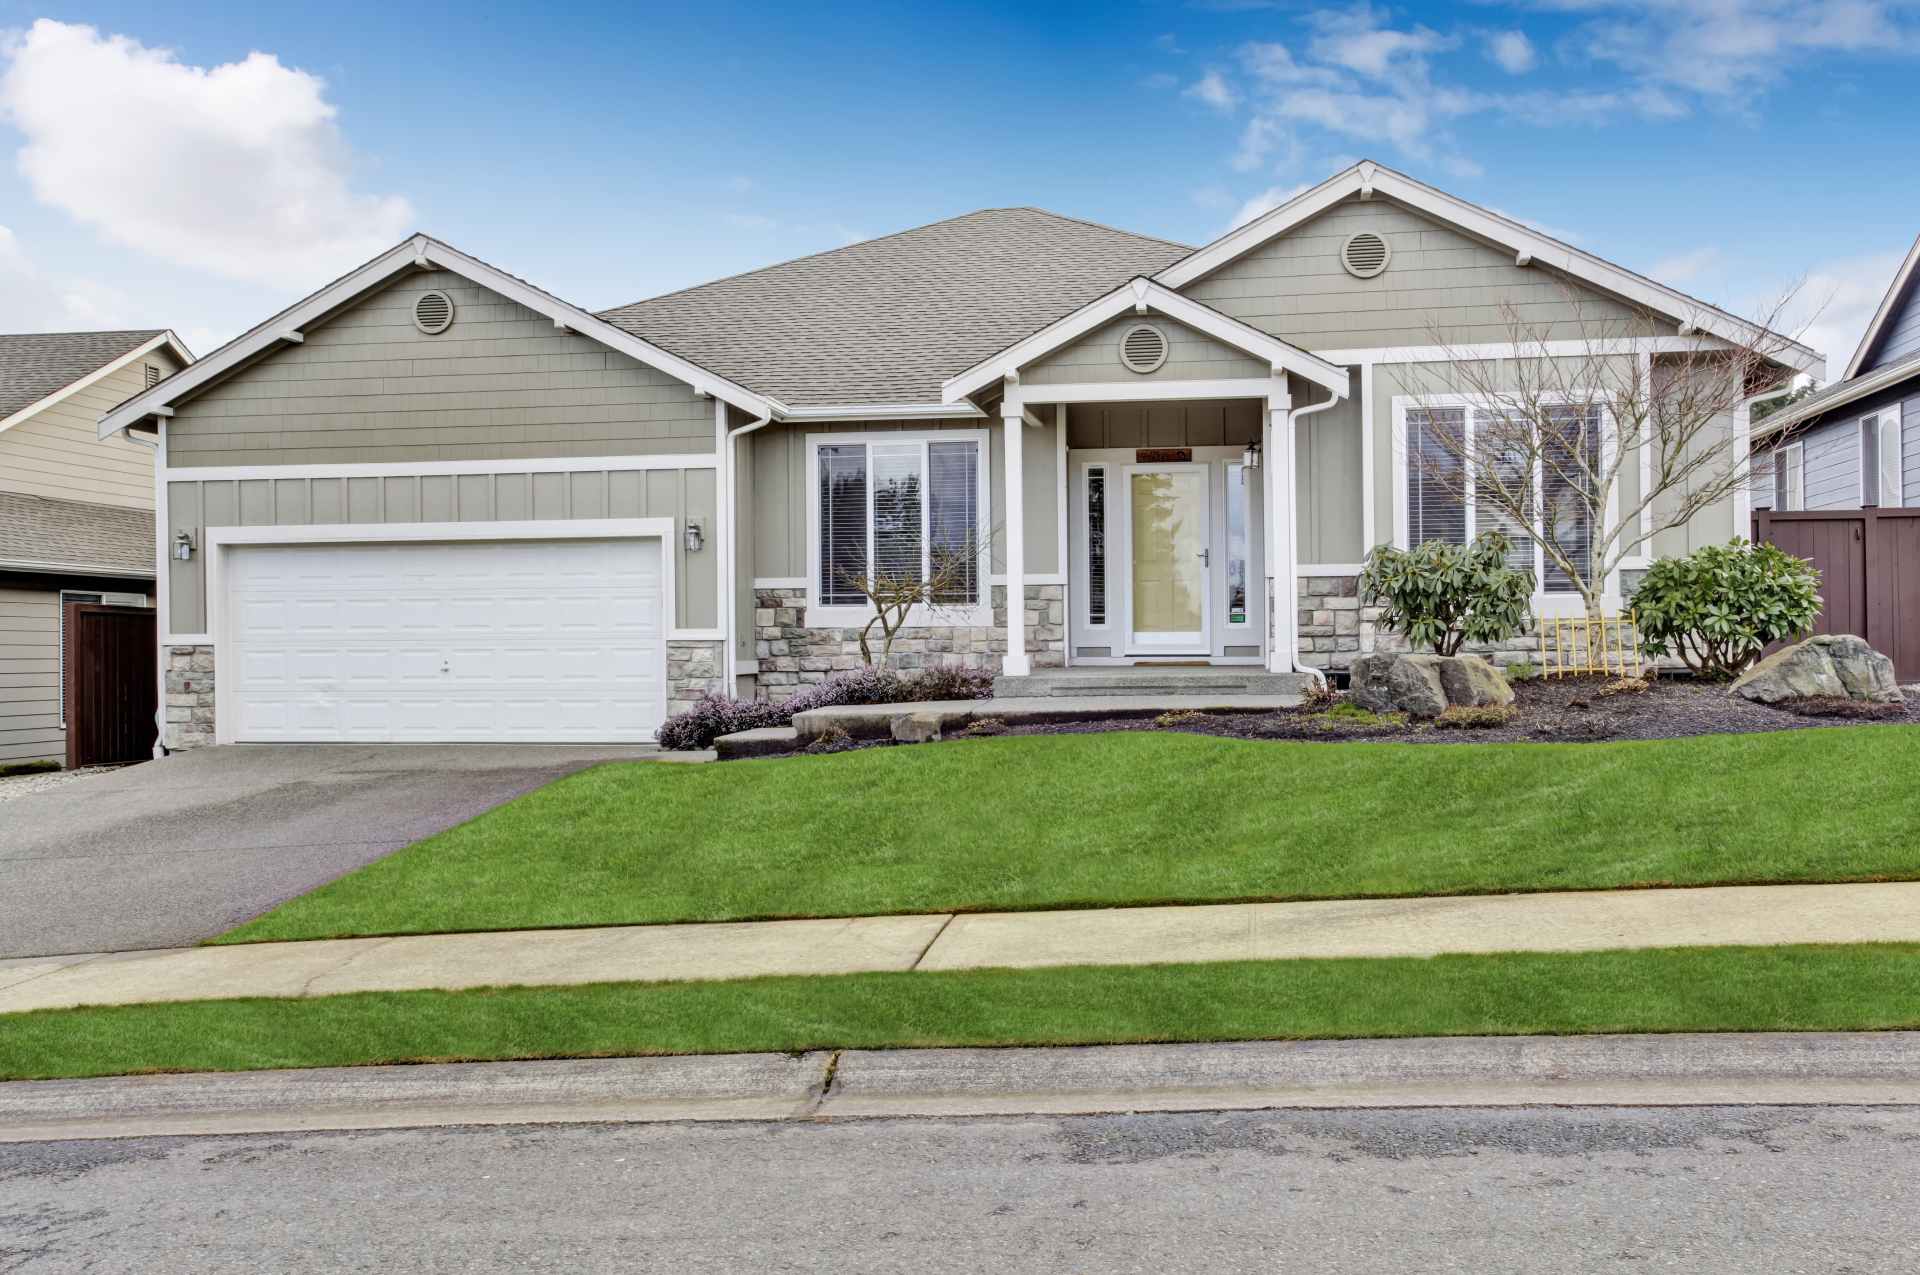 A house with grass on the front lawn